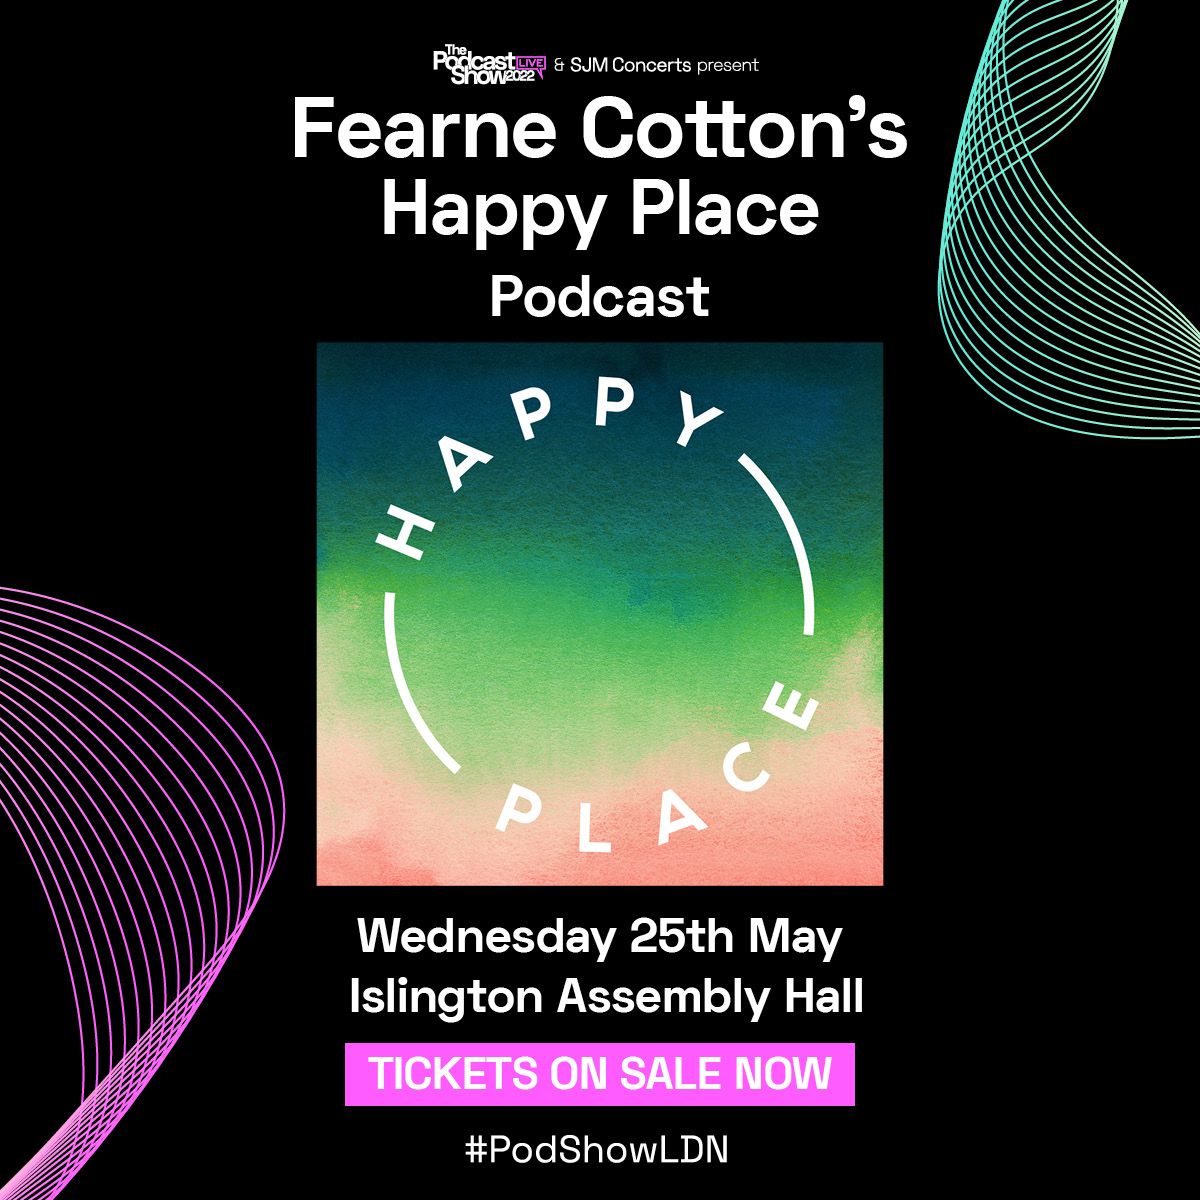 Fearne Cotton's Happy Place Podcast